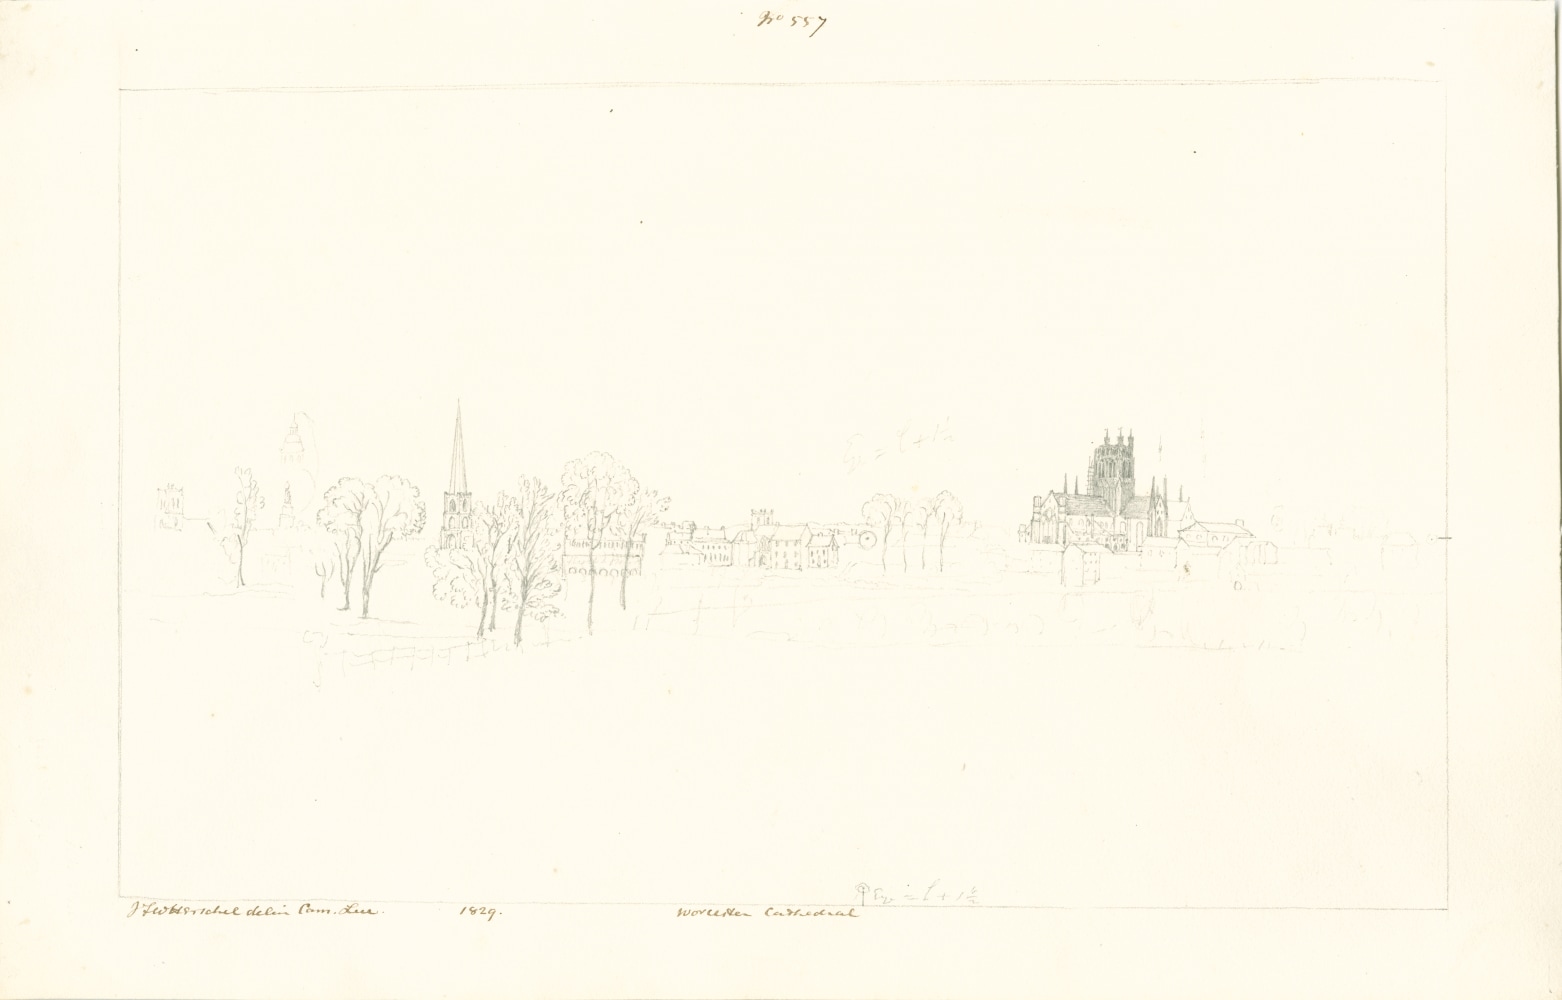 Sir John Frederick William HERSCHEL (English, 1792-1872) &quot;No 557 Worcester Cathedral”, 1829 Camera lucida drawing, pencil on paper 20.2 x 32.2 cm on 24.4 x 38.5 cm paper Watermark “J Whatman Turkey Mill”. Numbered, signed, dated and titled “No 557 / JFW Herschel delin Cam. Luc. / 1829 / Worcester Cathedral” in ink in border. Titled “Worcester” in pencil on verso.